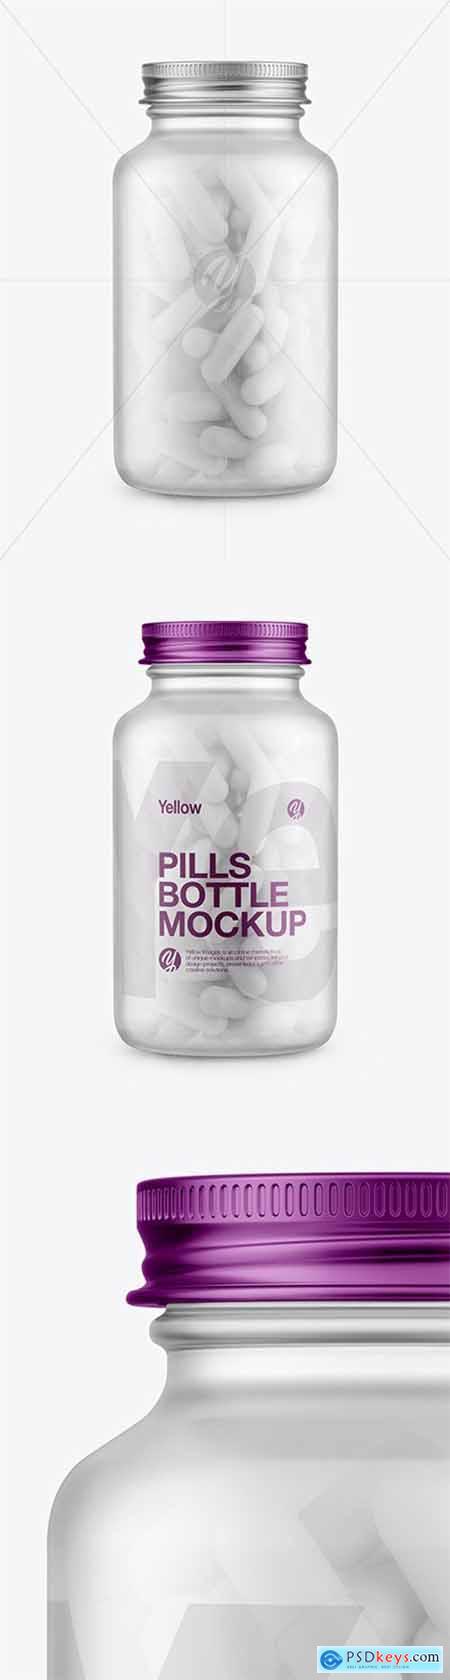 Frosted Glass Bottle With Pills Mockup